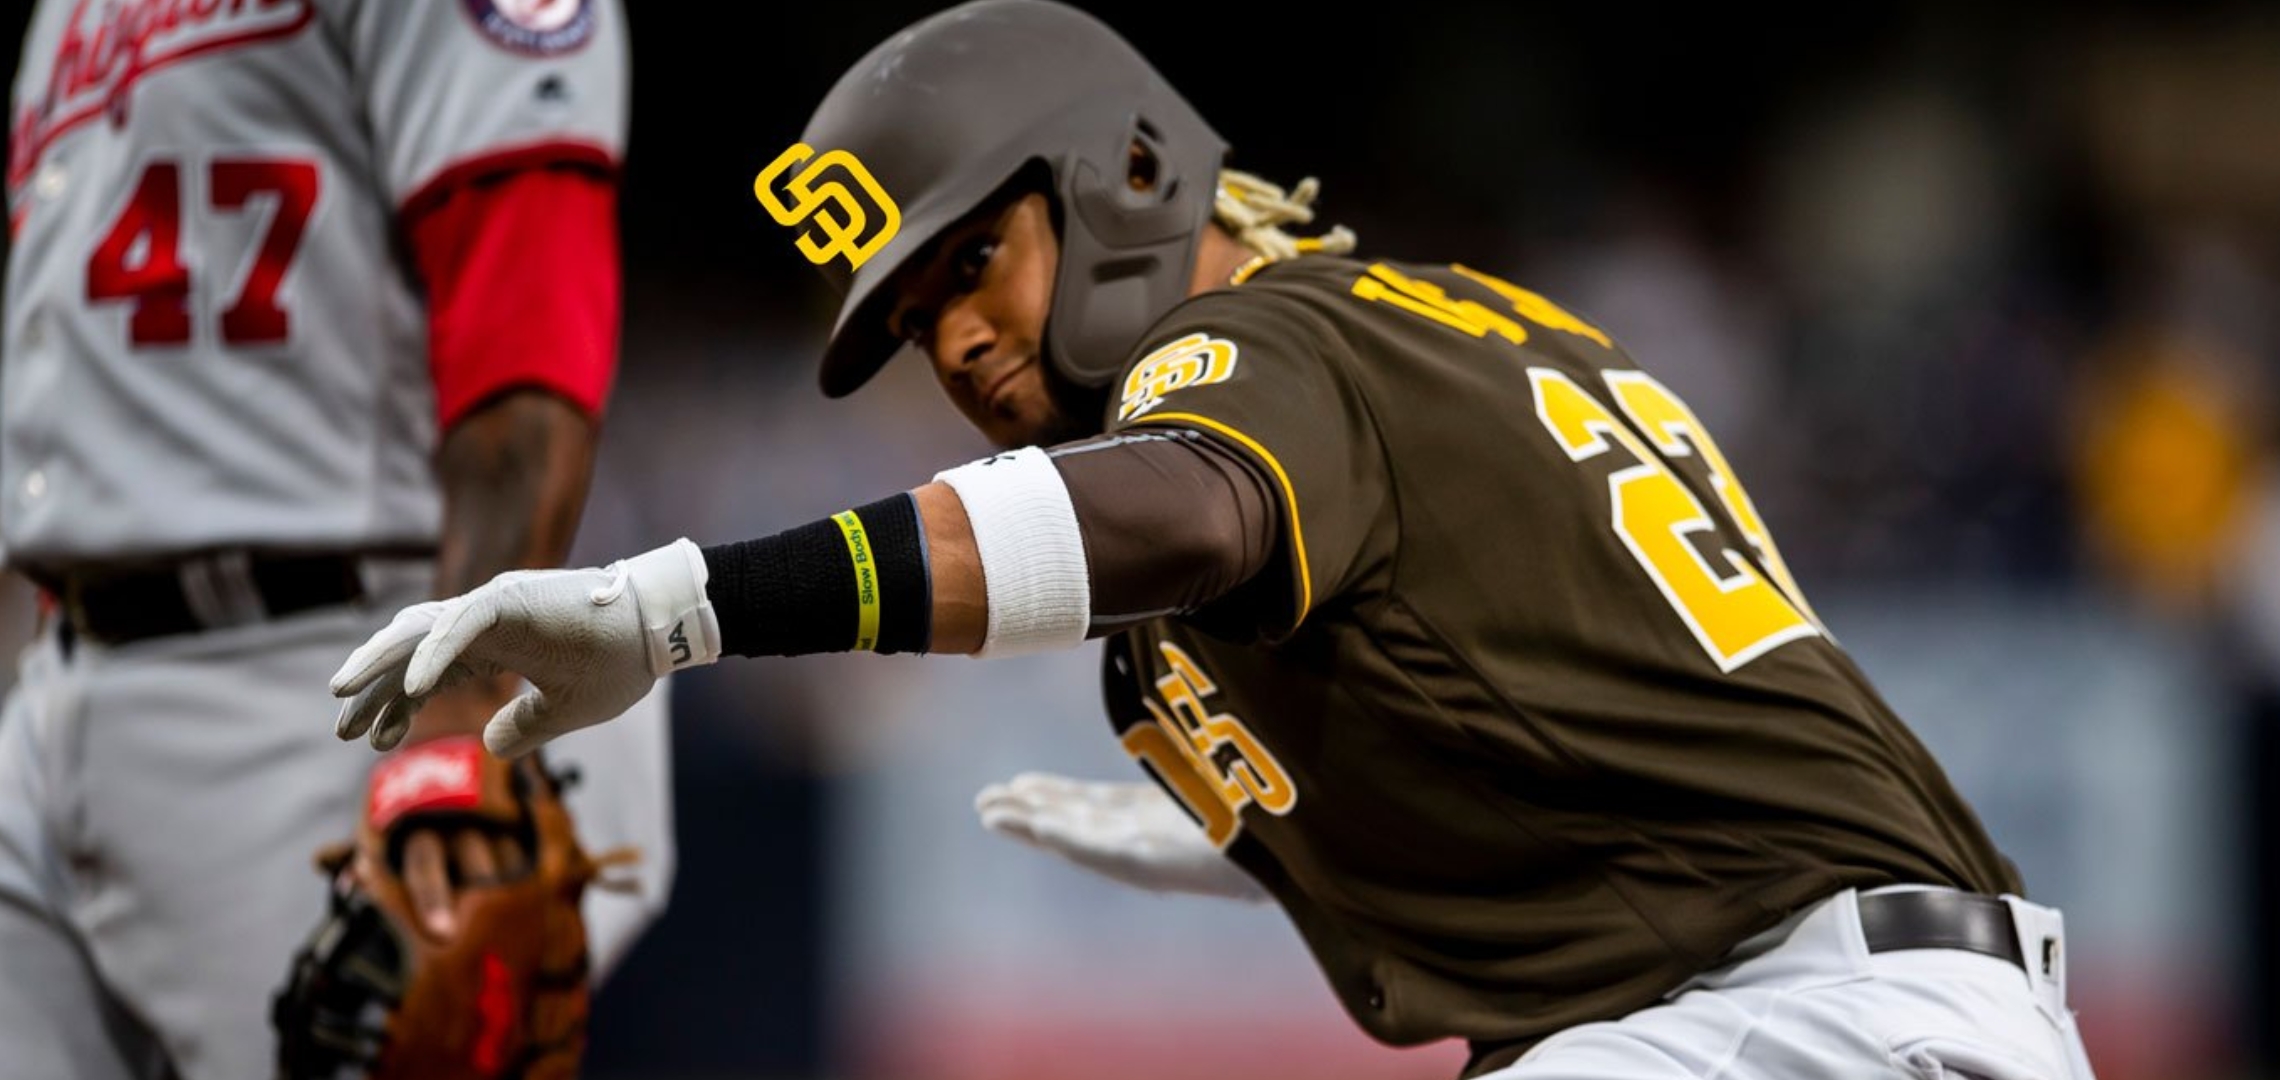 The Padres' next big move should be going back to brown uniforms